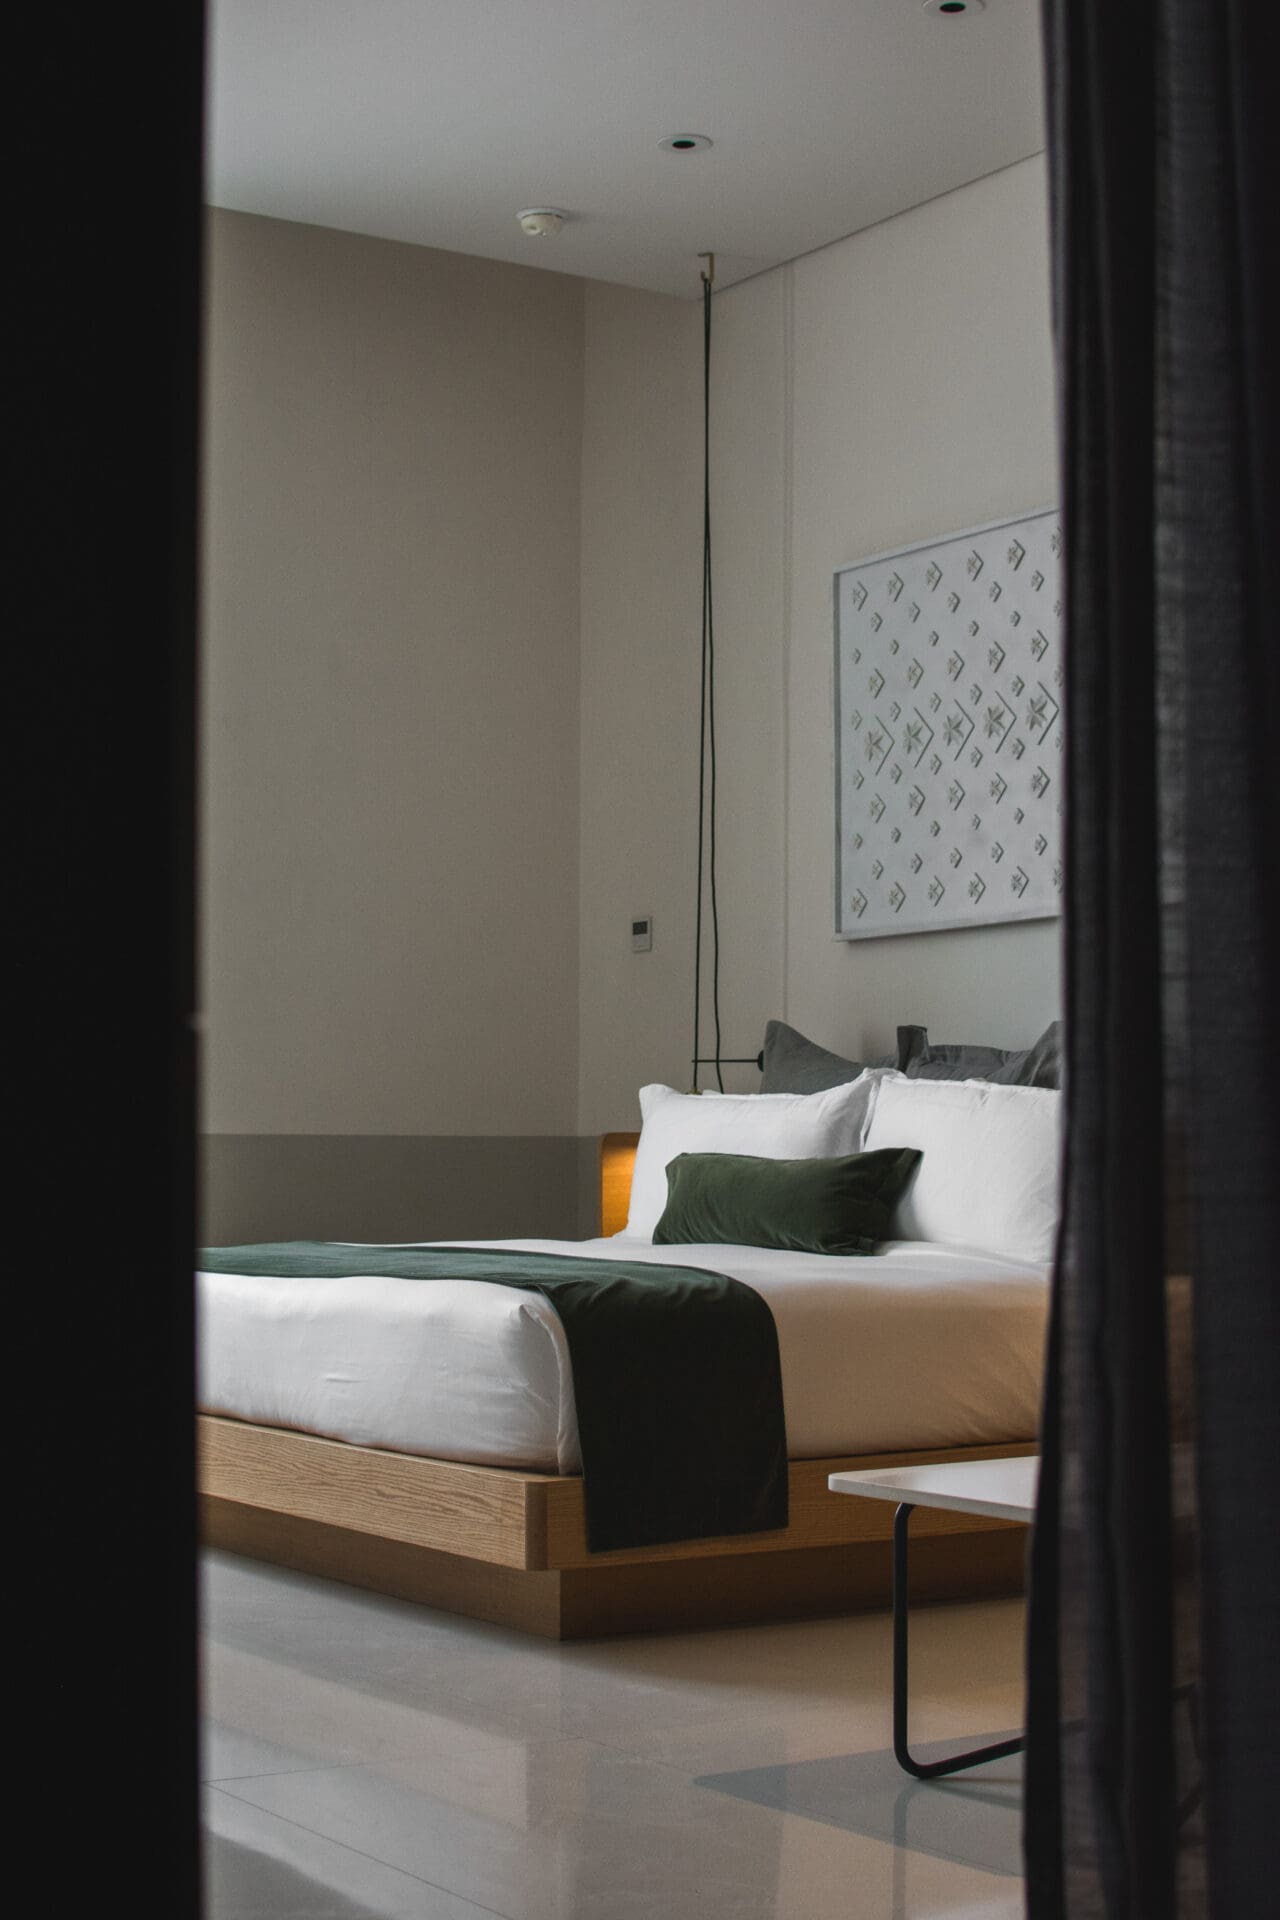 The best hotels in Mexico City | A view of a bedroom in Umbral. The bed is viewed between two long dark drapes.